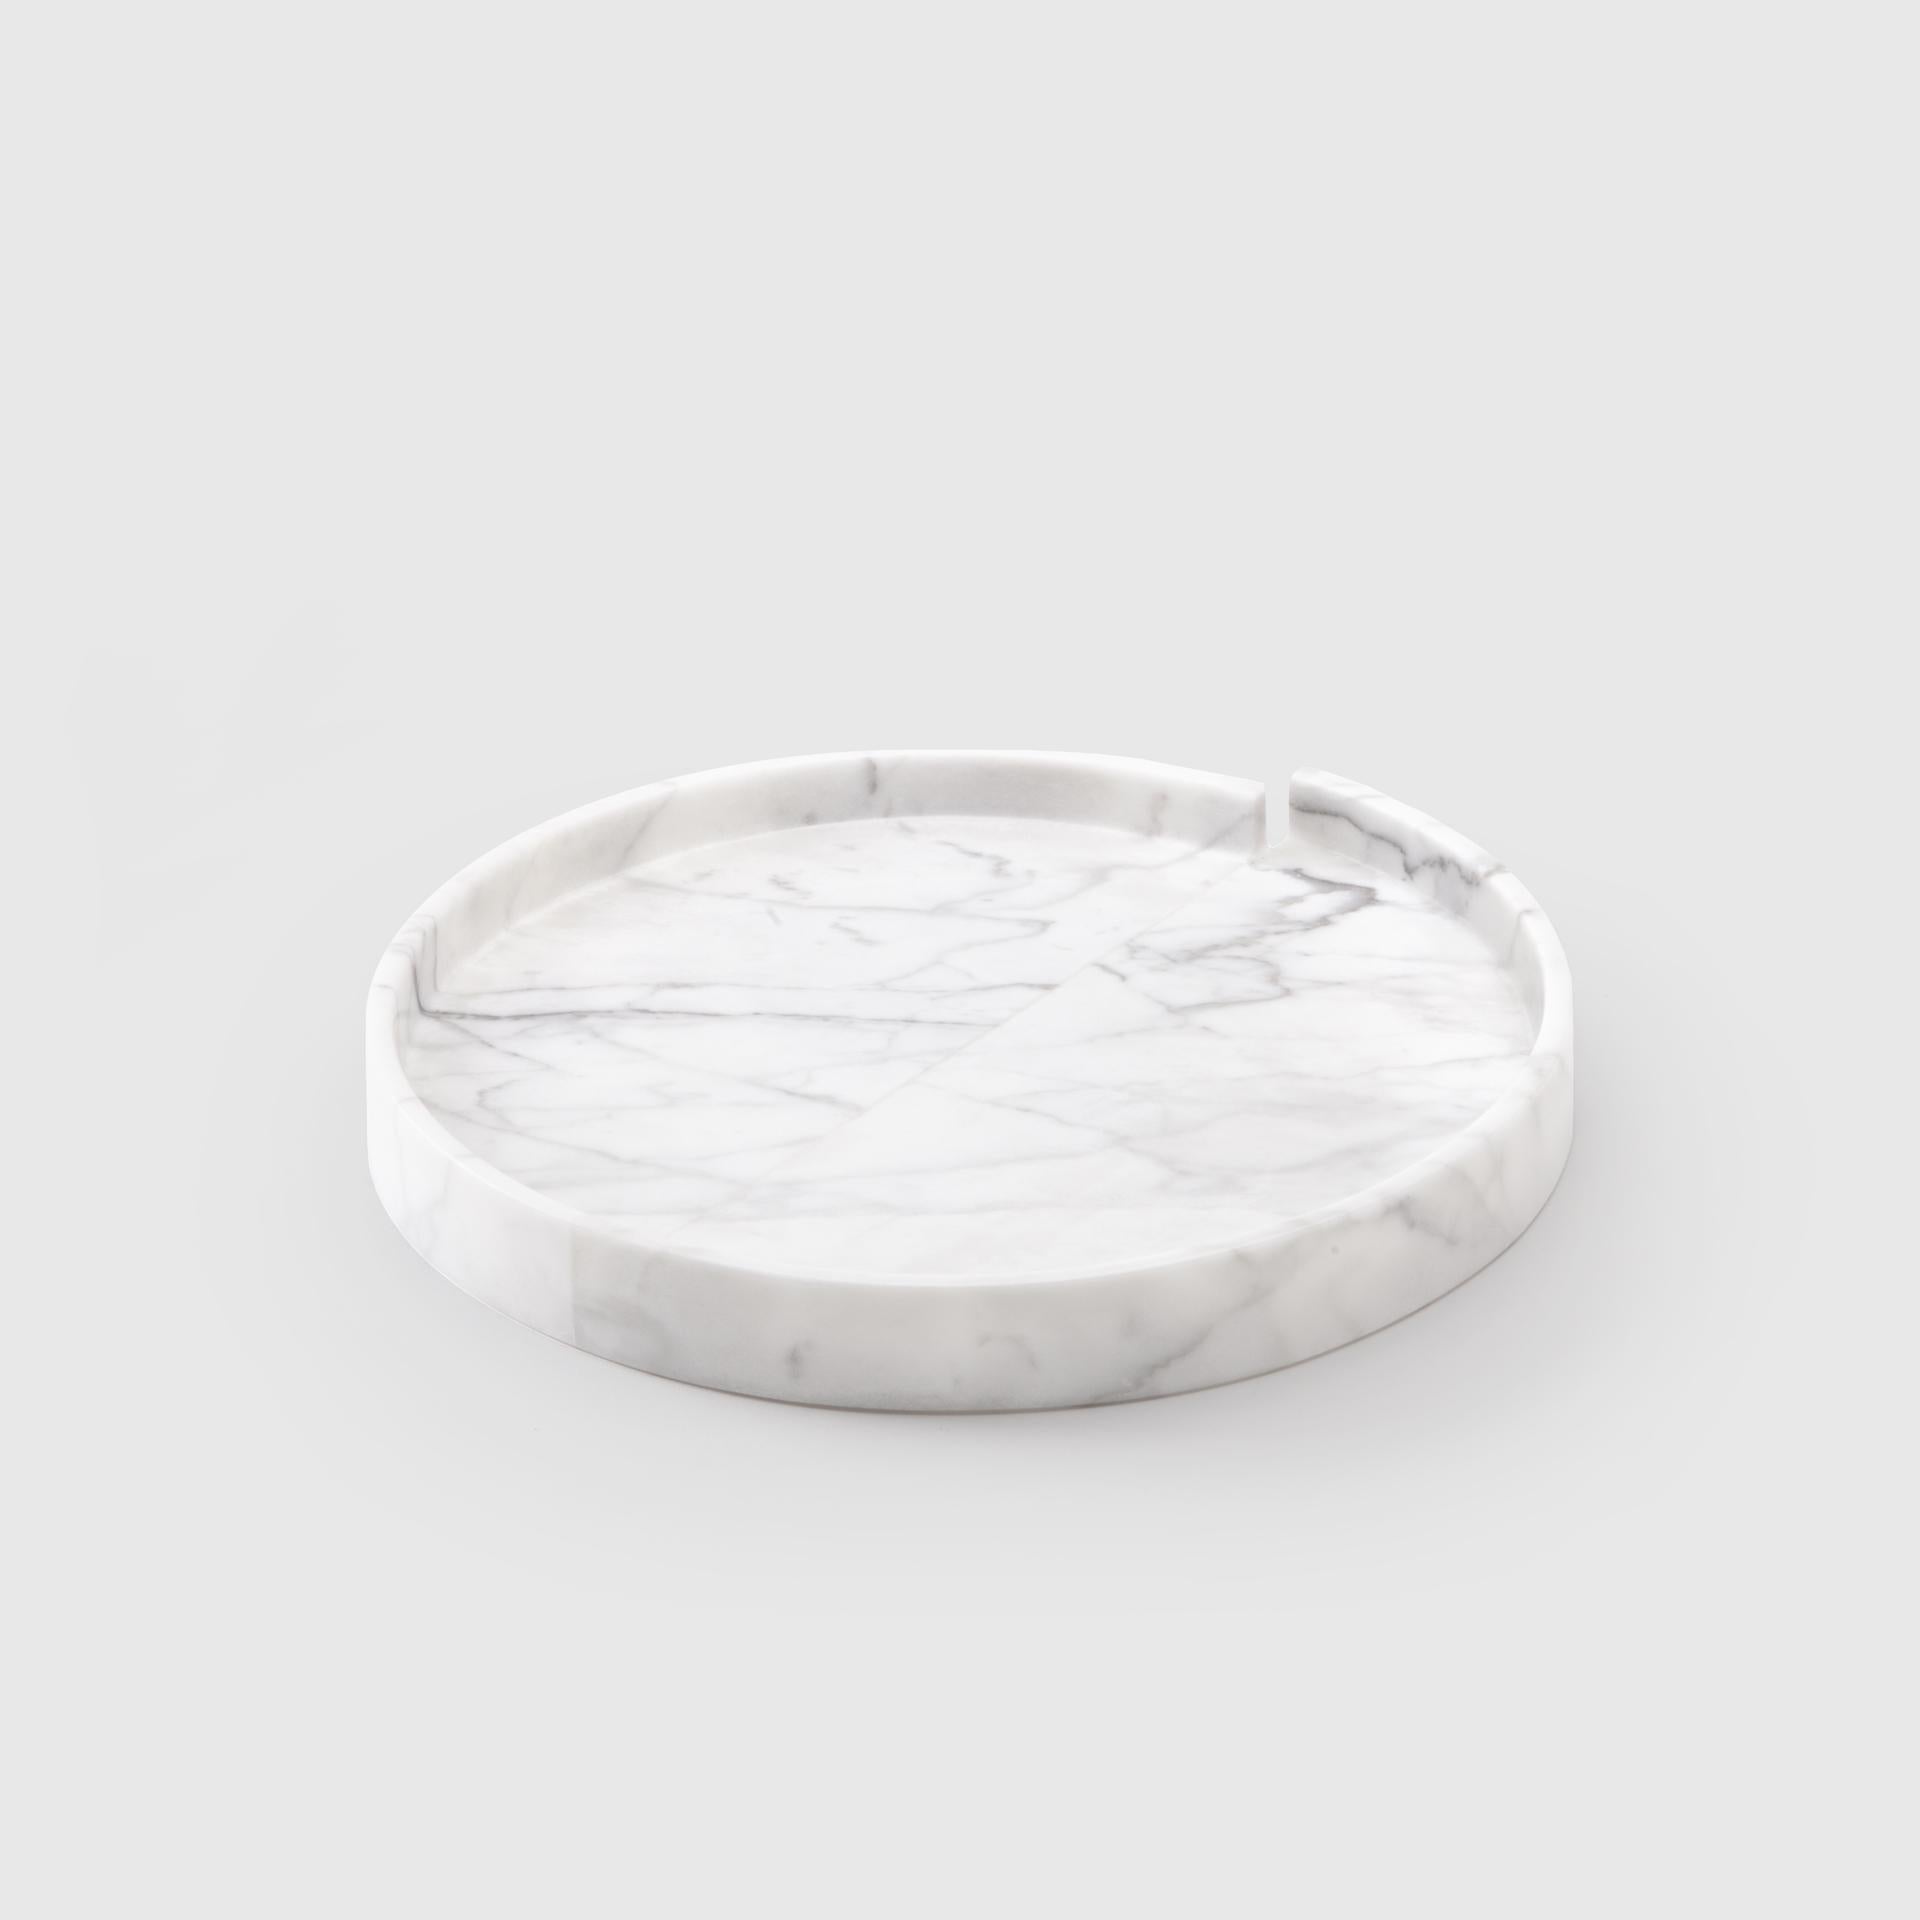 Deconstructivist Modern Tray by Sandro Lopez, Italian White Statuary Marble In New Condition For Sale In Milano, IT